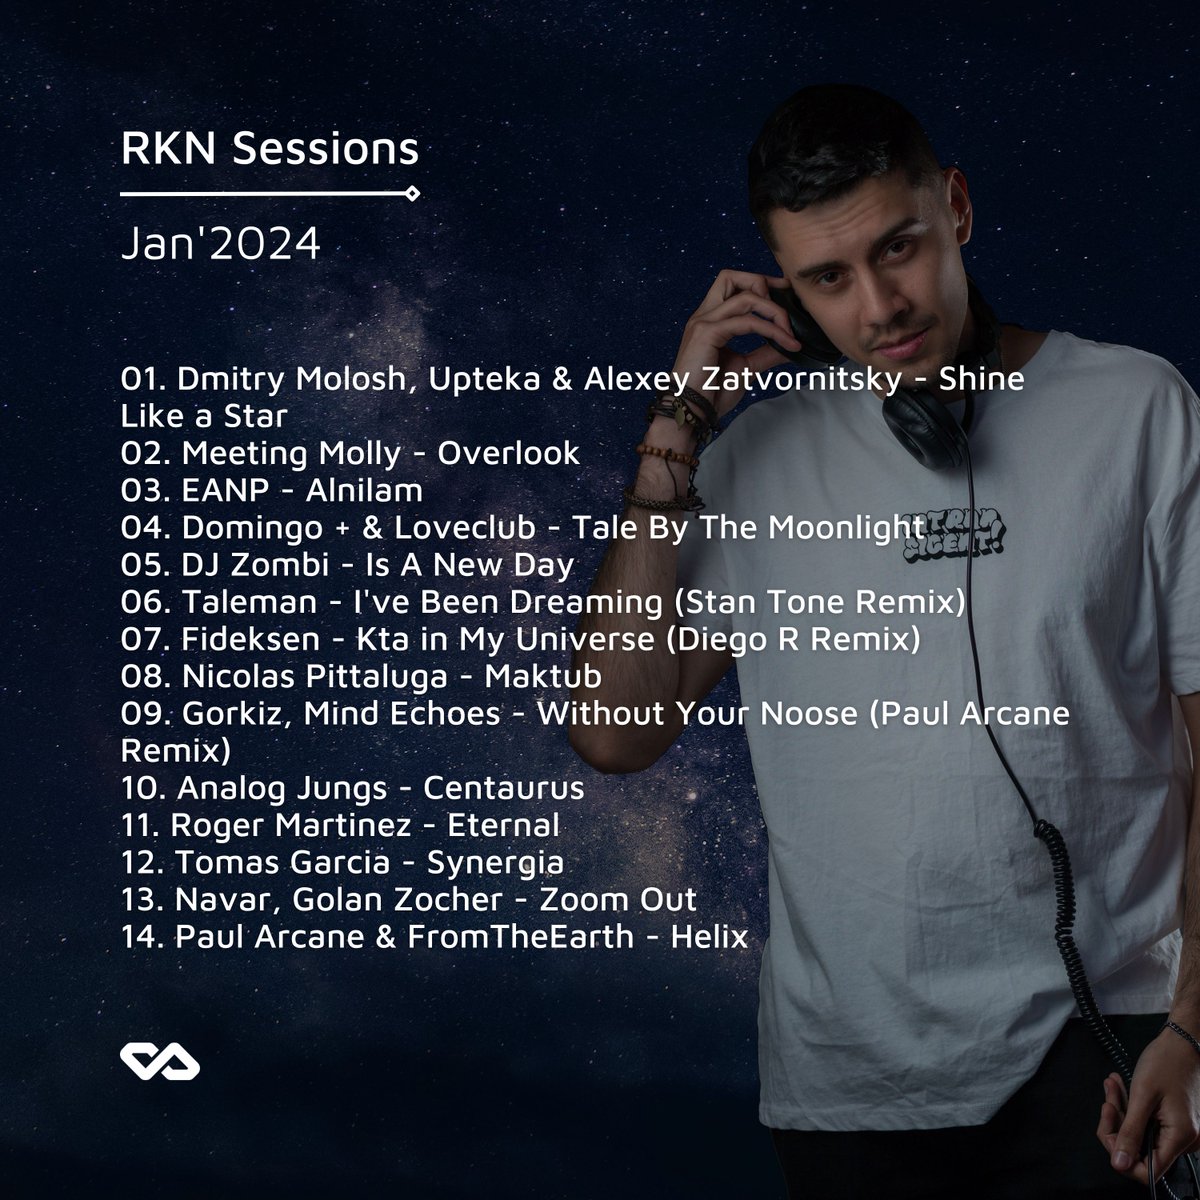 let's welcome 2024 with a brand new RKN Sessions episode: featuring 2 unreleased tracks (coming soon)! 🎶